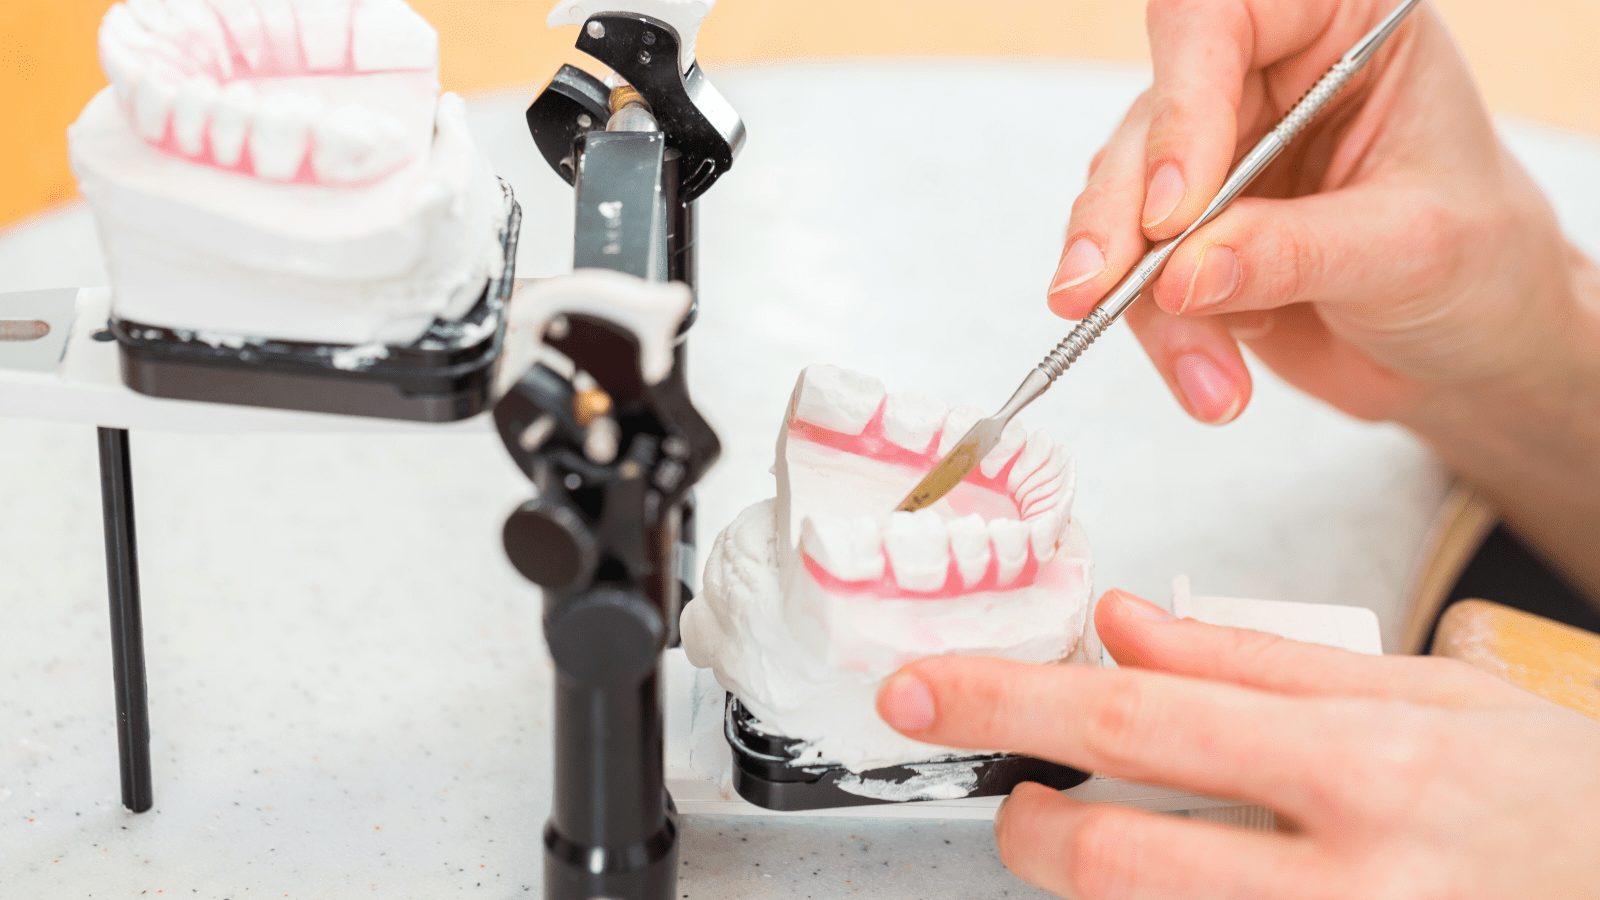 How long does permanent dental cement last?